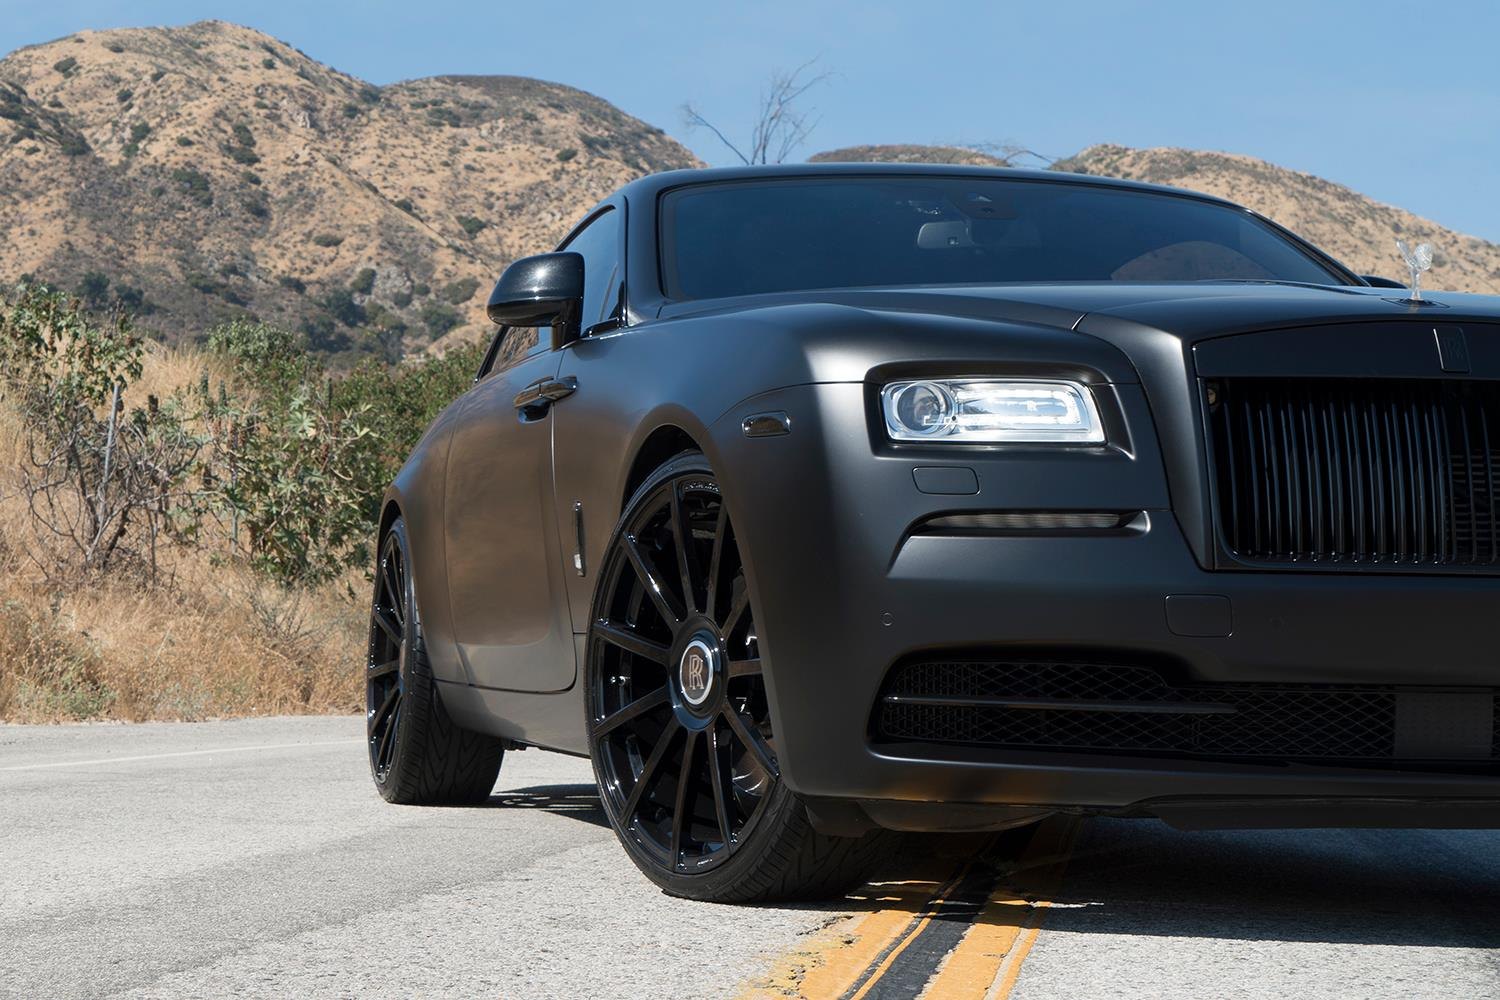 Blacked Out Billet Grille on Rolls Royce Wraith - Photo by Forgiato